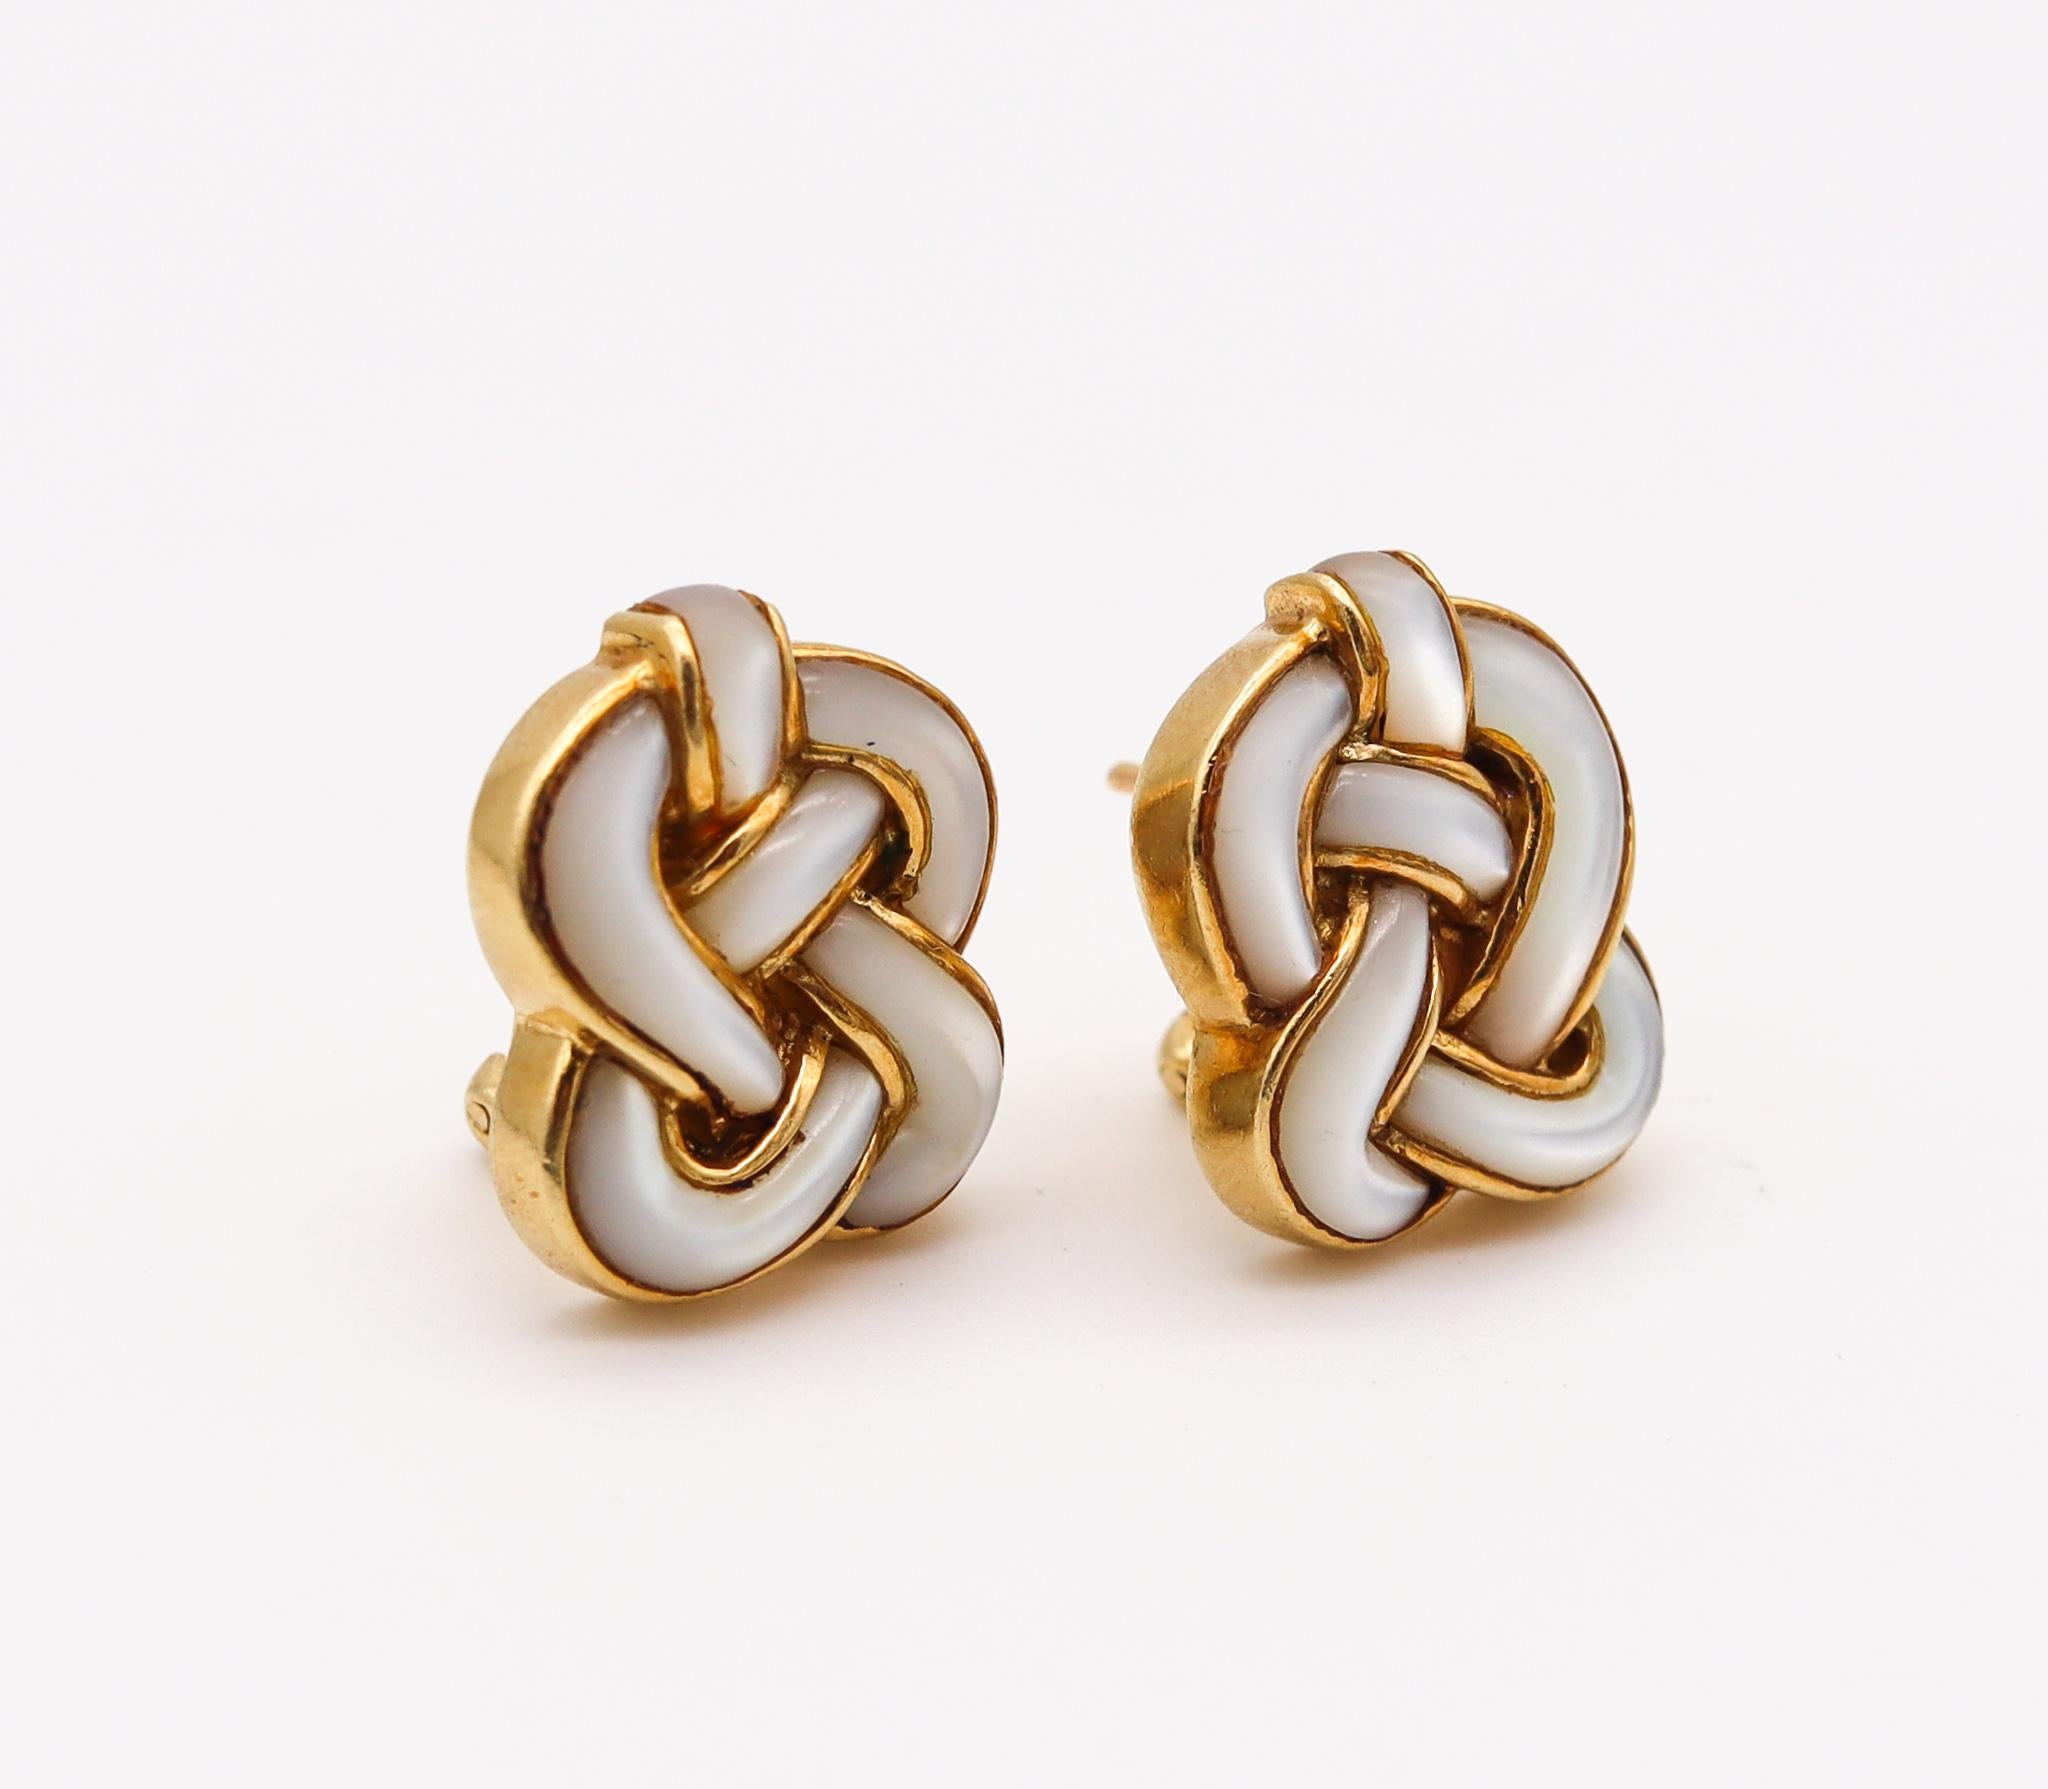 Knots earrings designed by Angela Cummings.

An elegant and playful free-forms shaped pair of earrings created in New York city by Angela Cummings, back in the 1980. They has been crafted in solid yellow gold of 18 karats with high polished finish